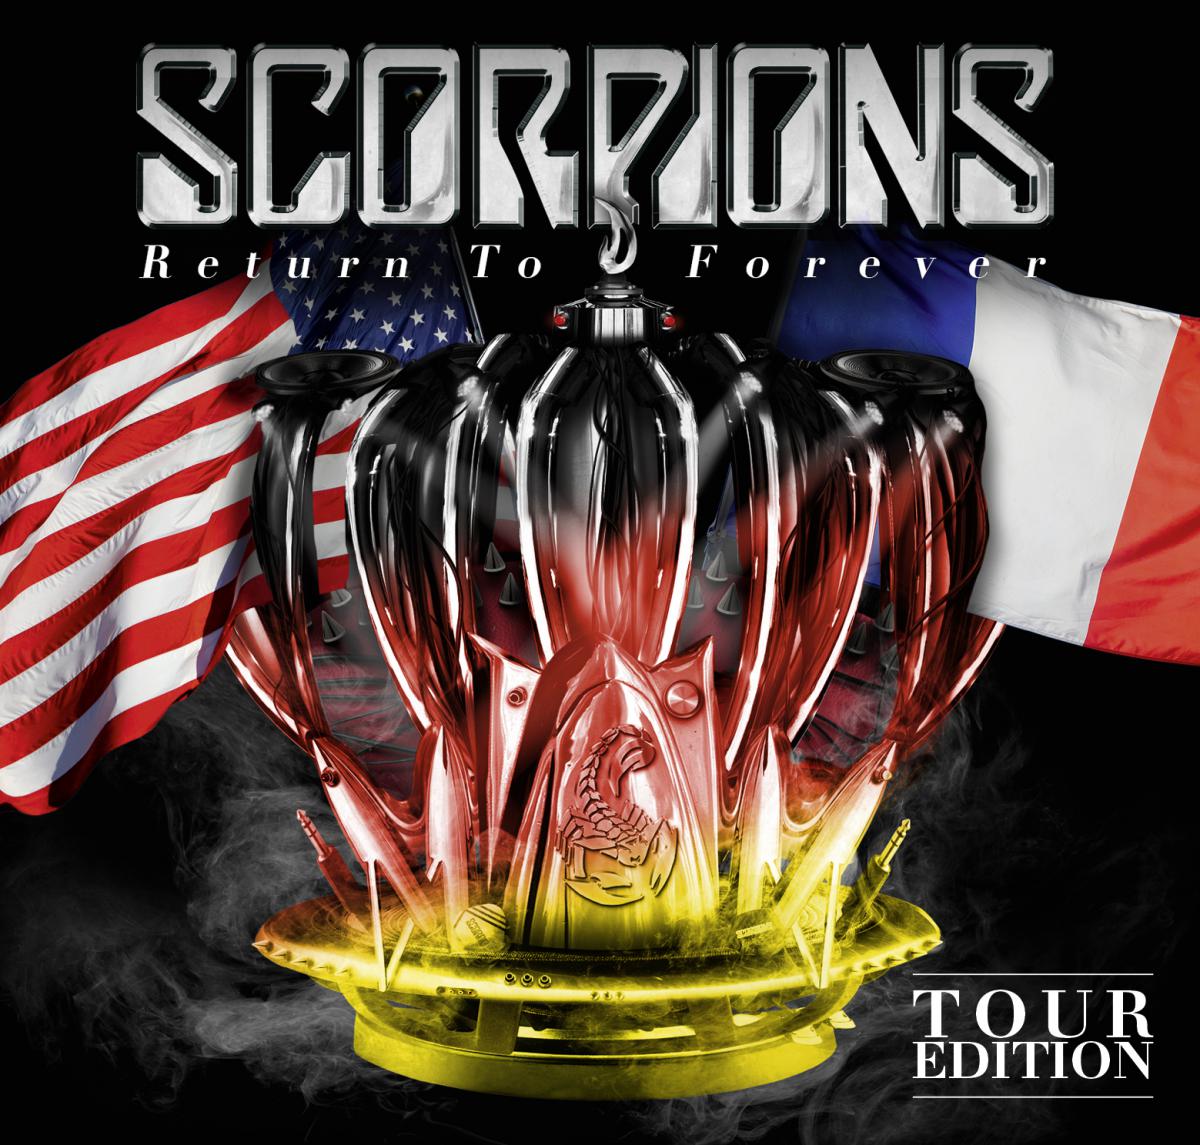 scorpions_return_to_forever_tour_edition_cover